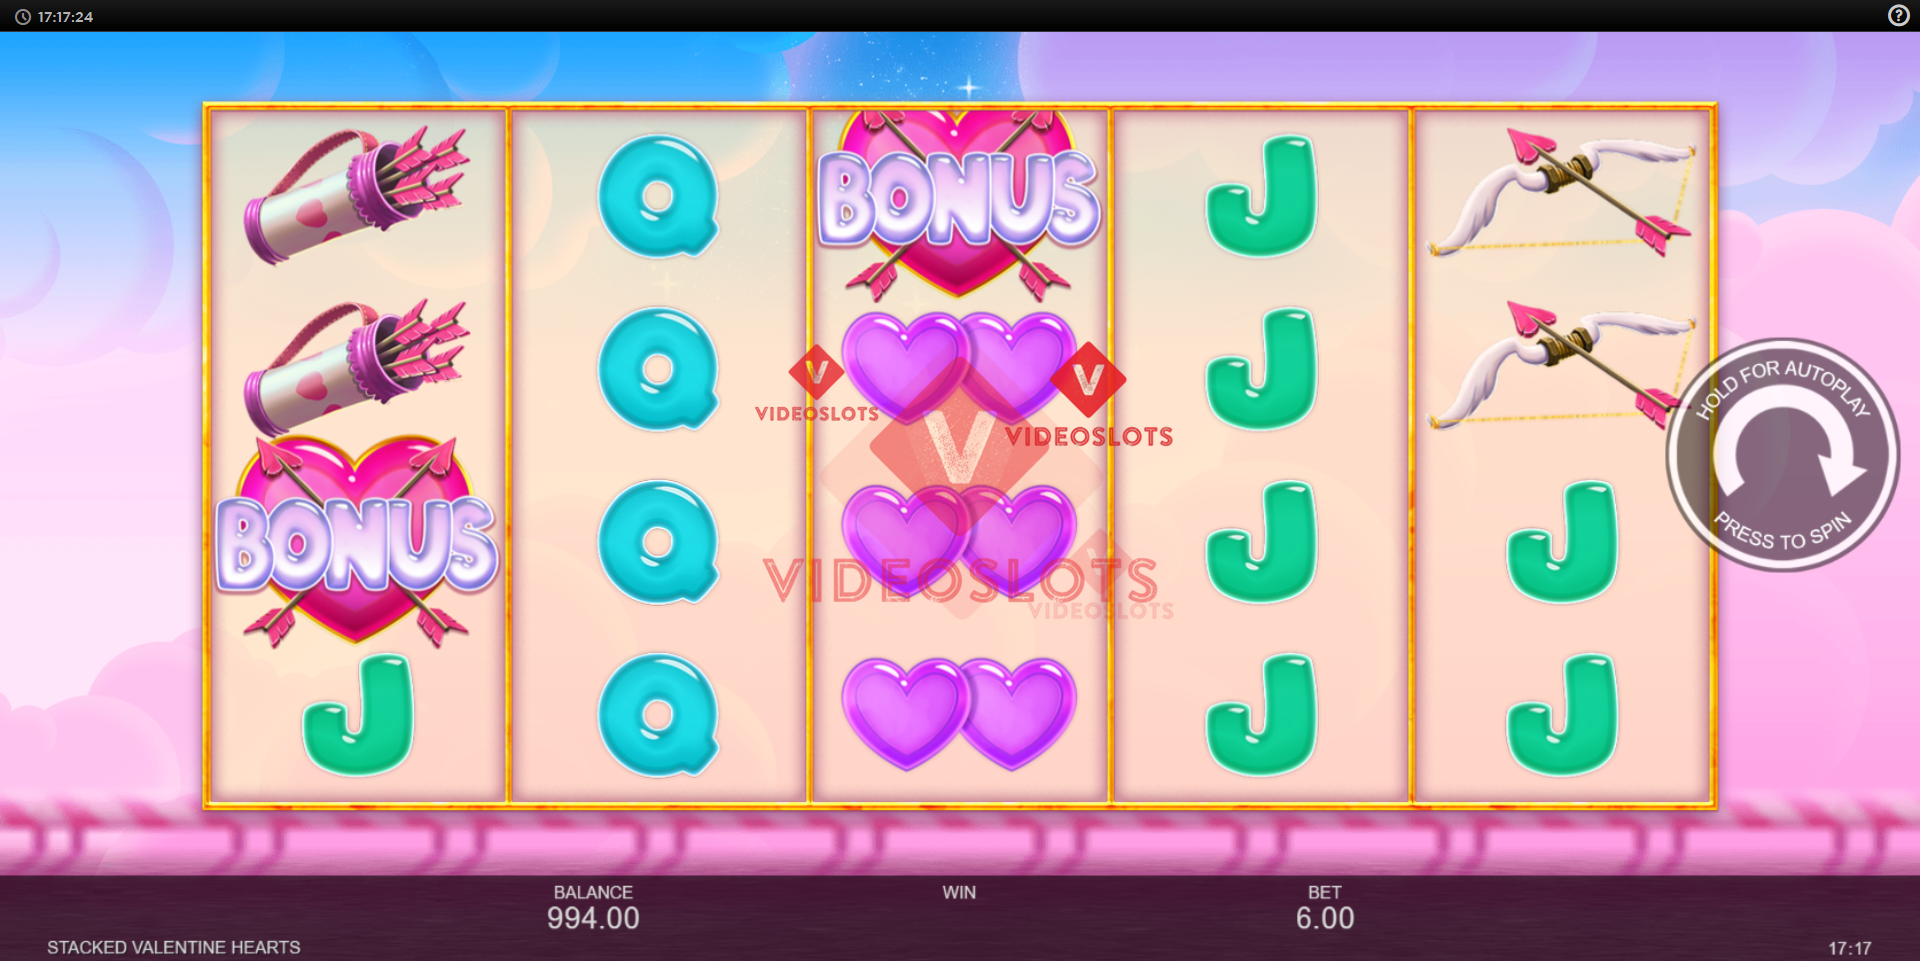 Base Game for Stacked Valentine Hearts slot from Inspired Gaming